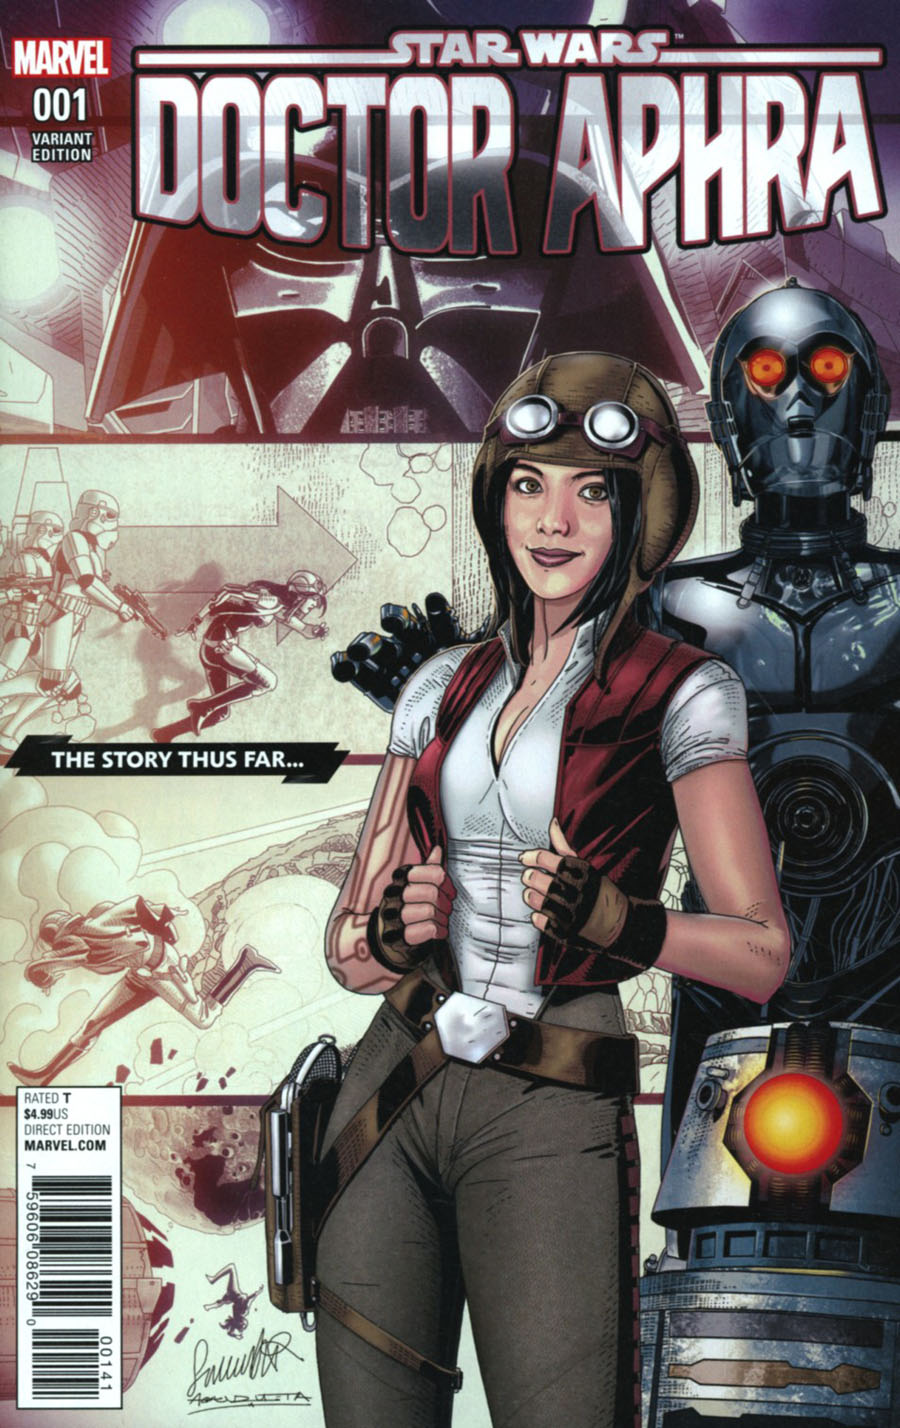 Star Wars Doctor Aphra #1 Cover C Variant Salvador Larroca Classified Story Thus Far Cover